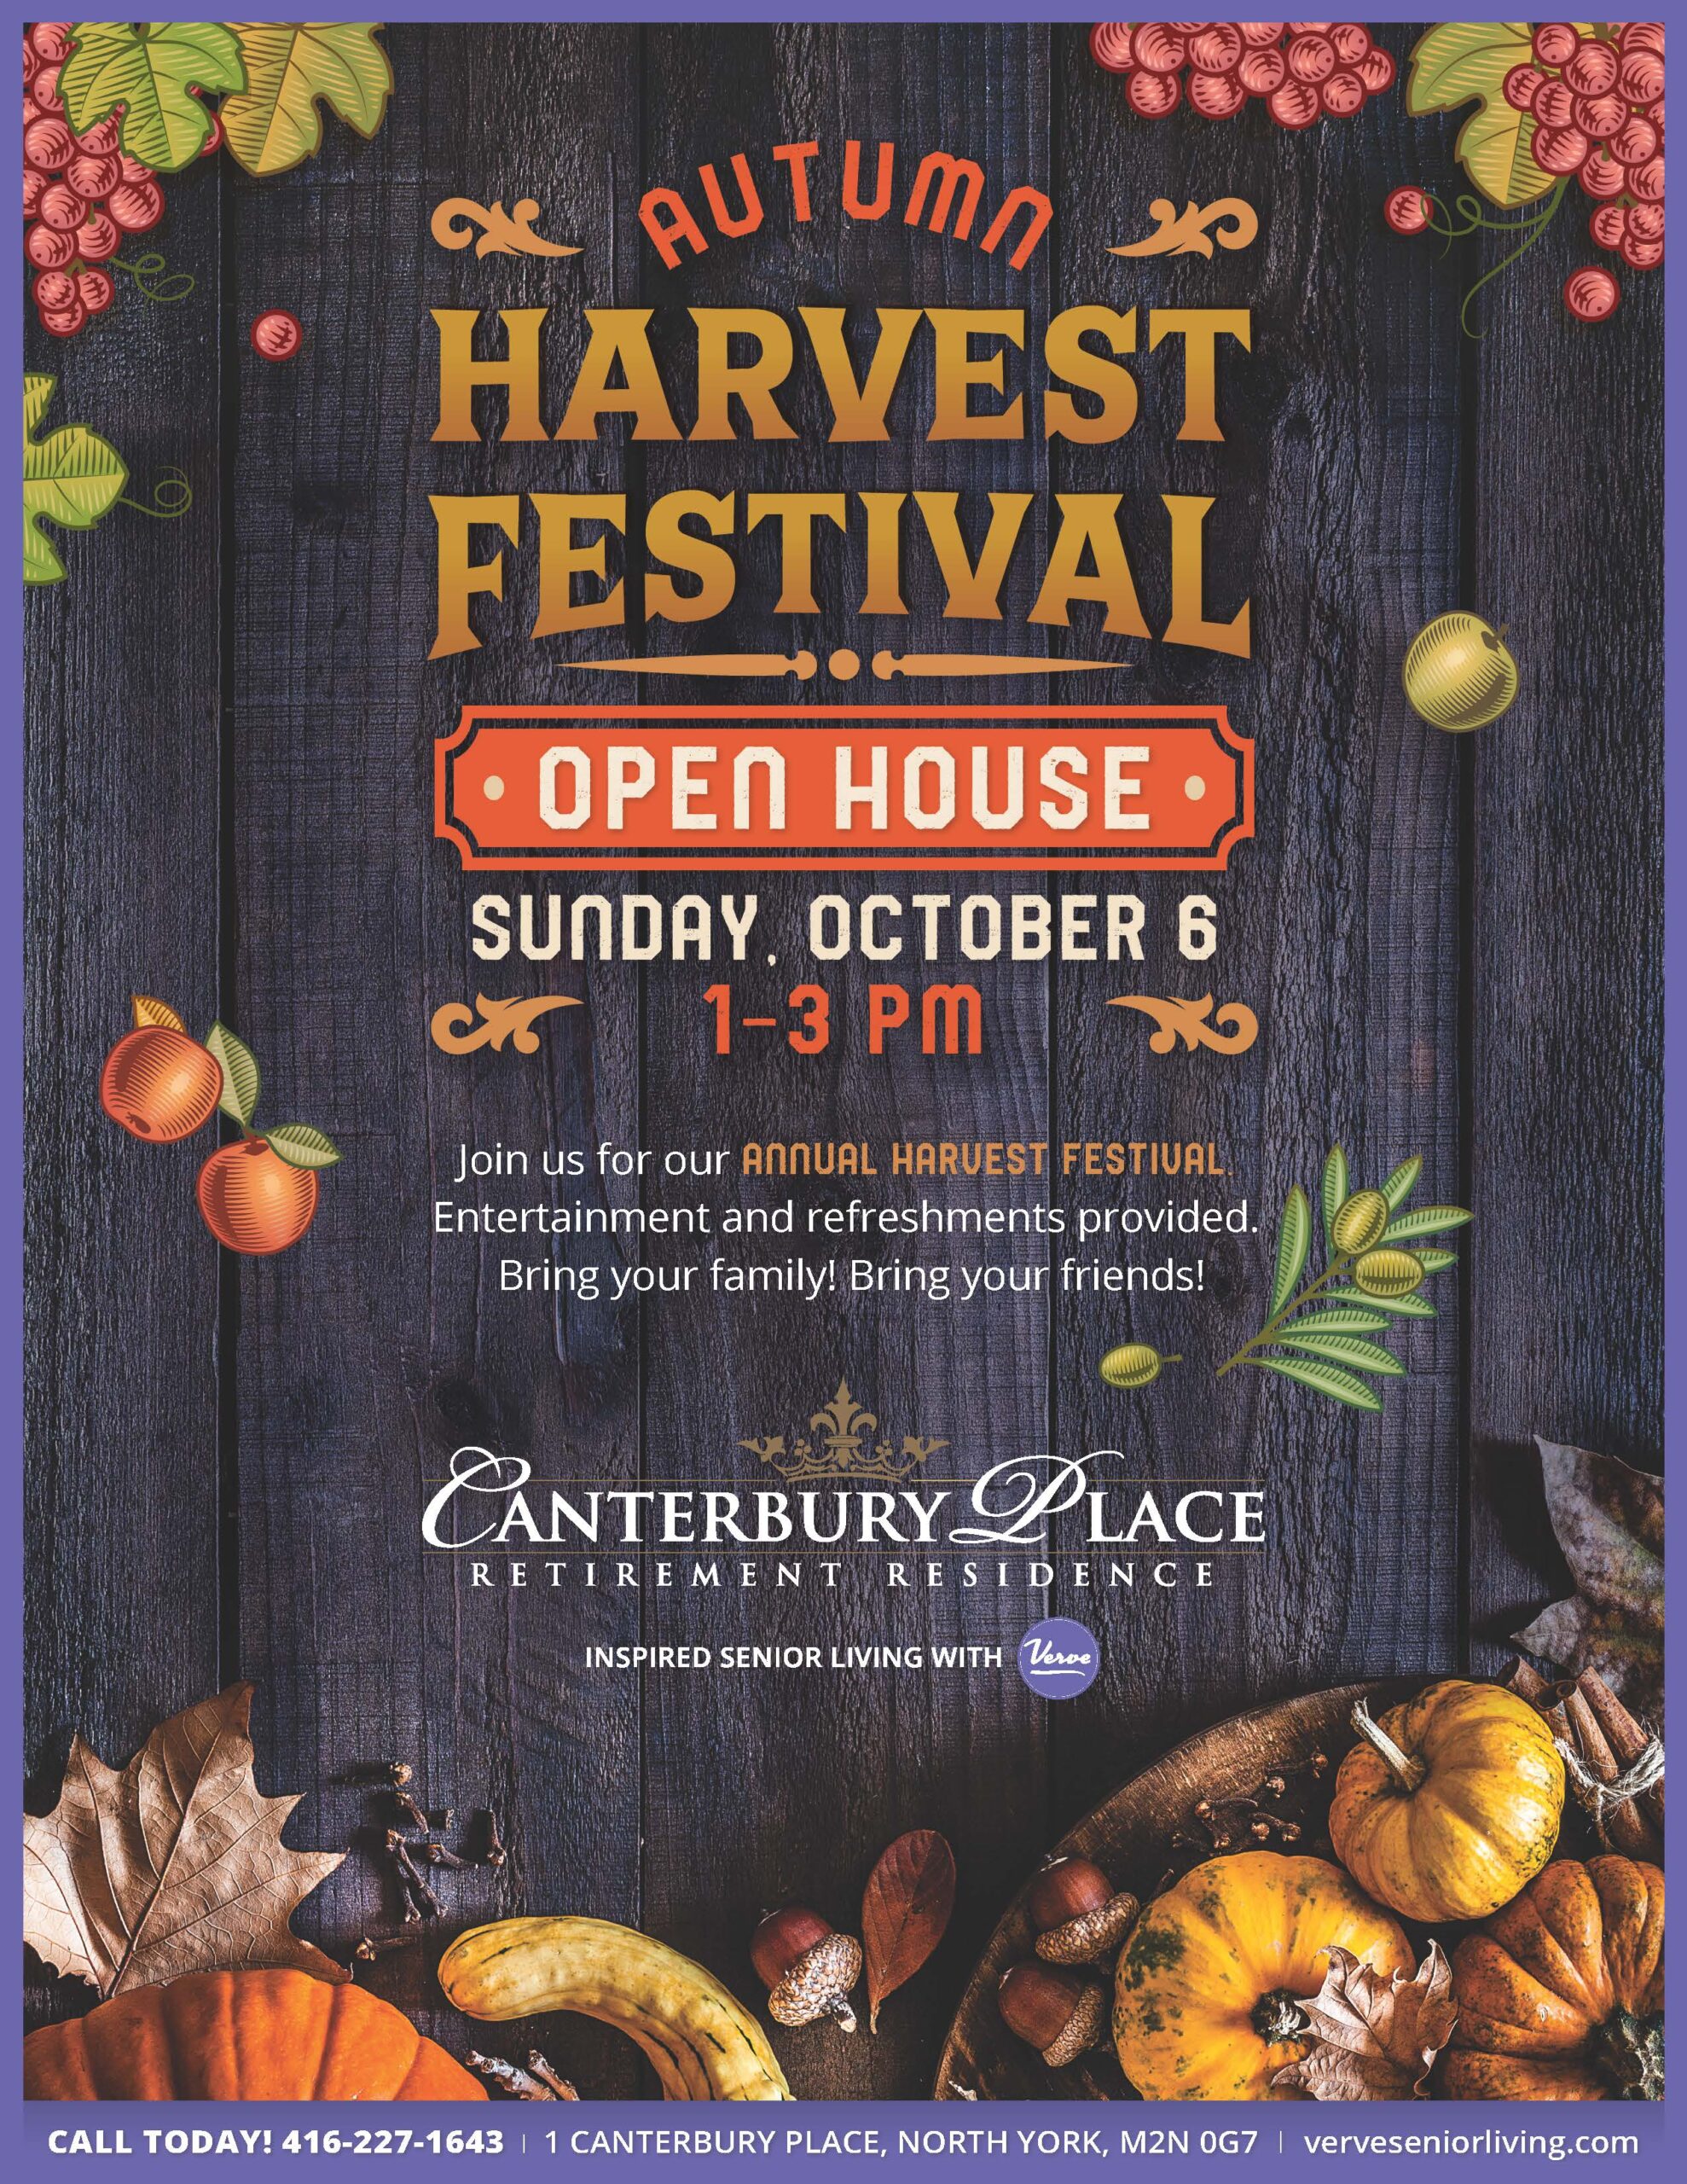 Canterbury Place Autumn Harvest Festival Open House, Oct 6th, 1-3pm